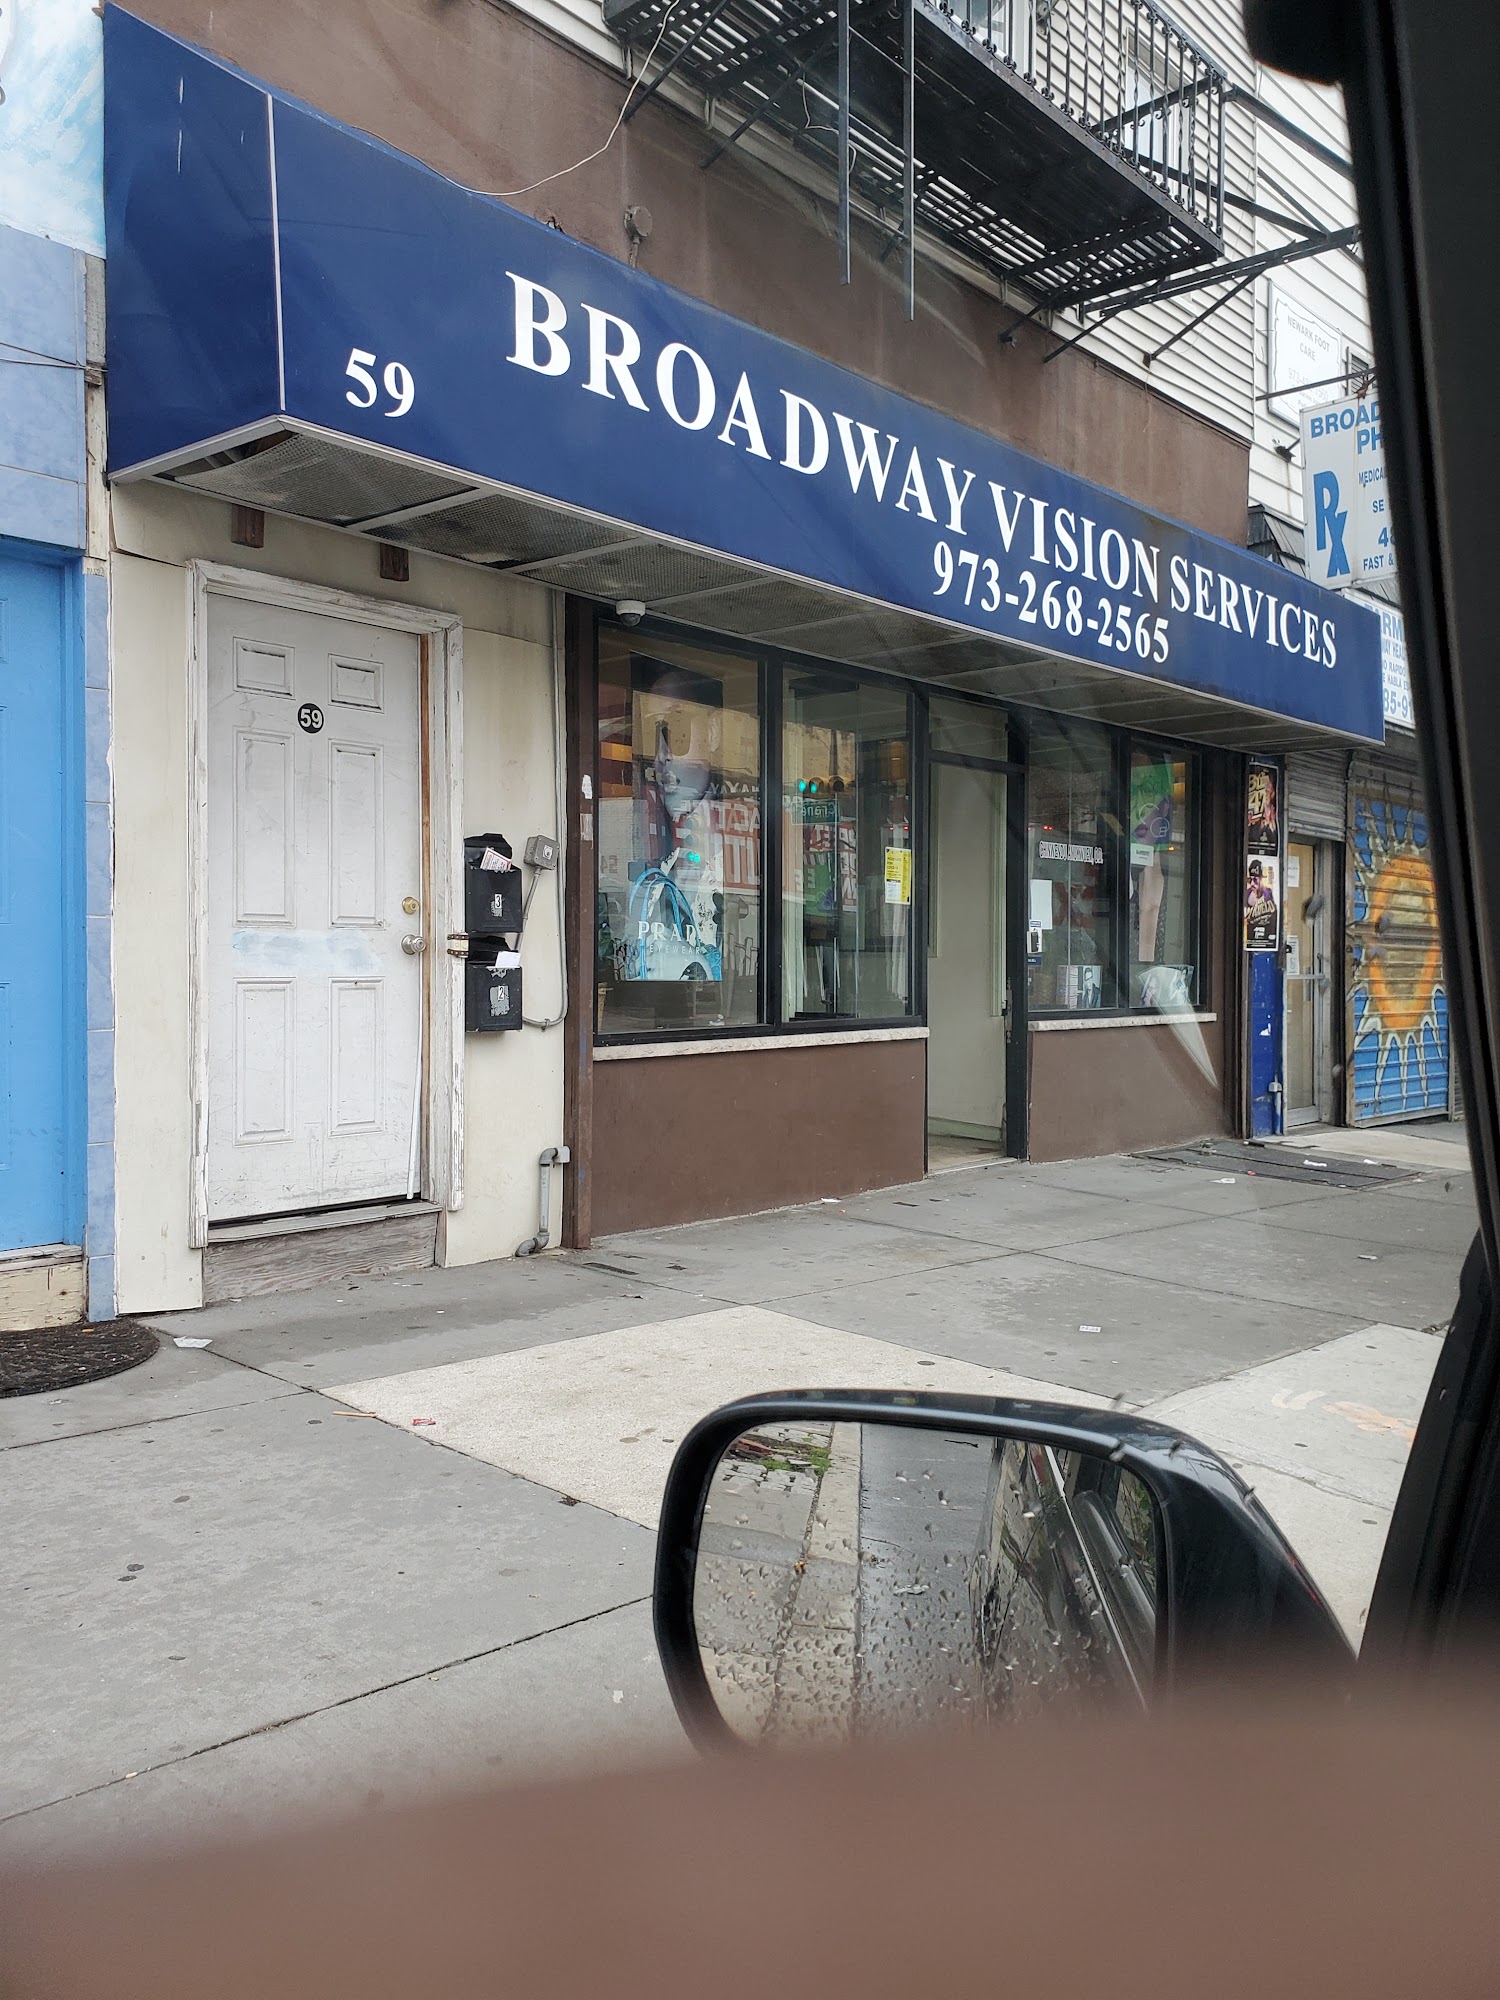 Broadway Vision Services